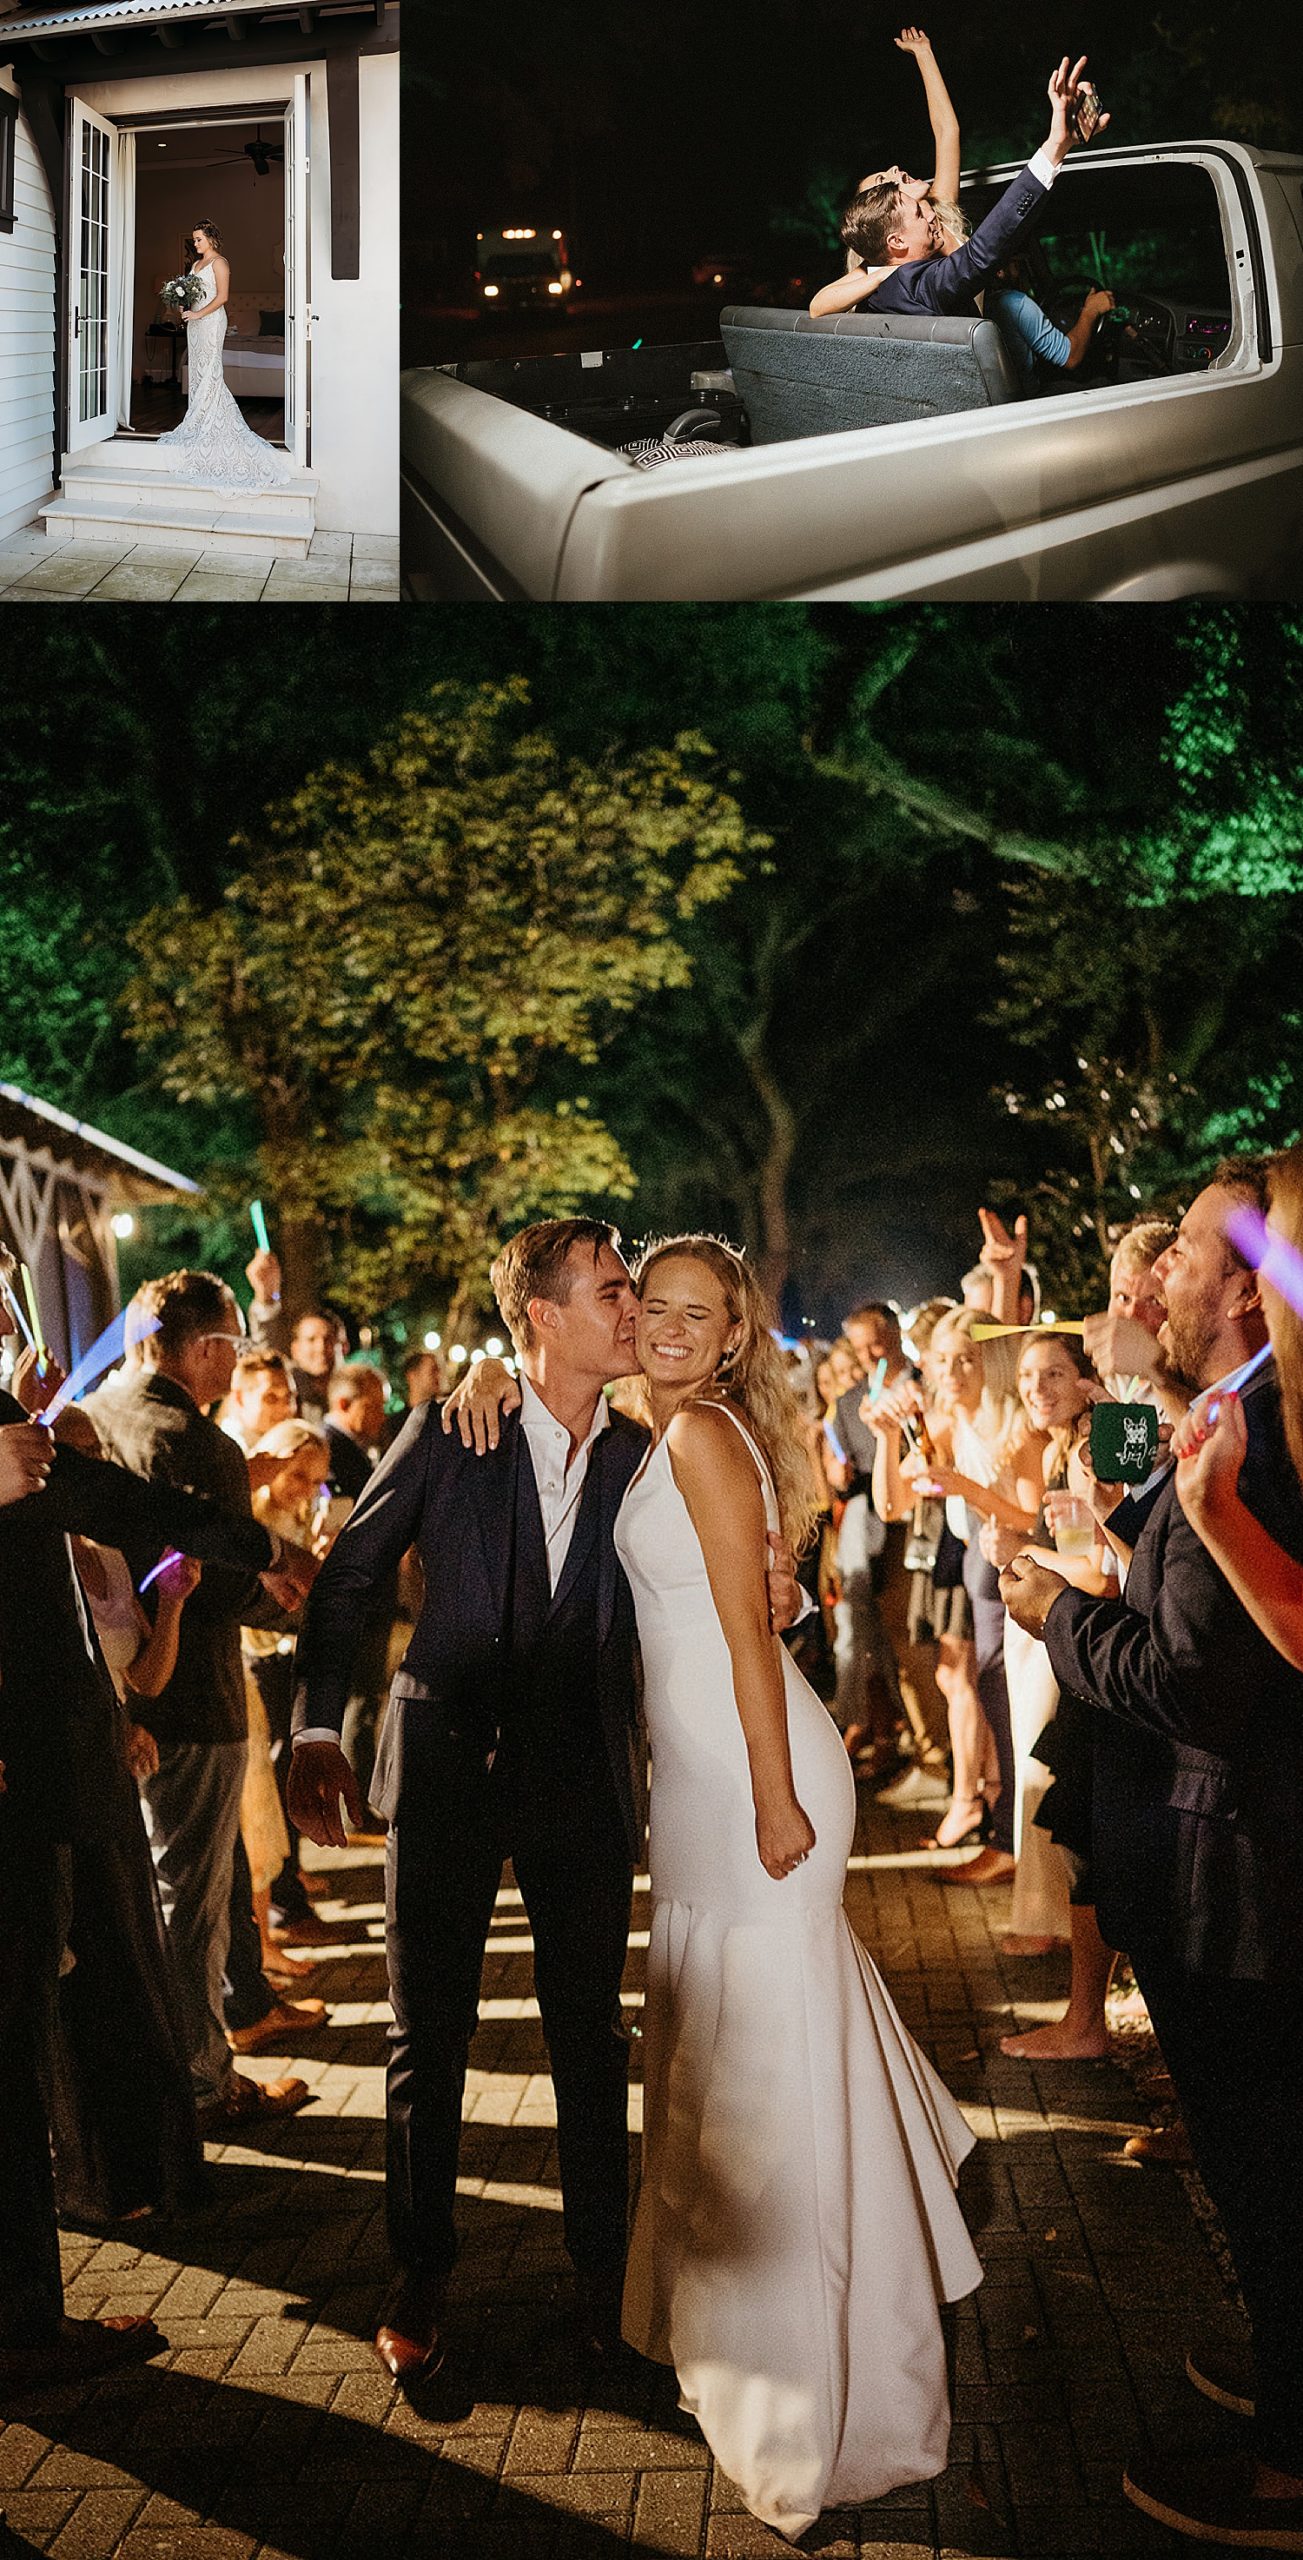 getaway car with bride and groom by Emily burns photo